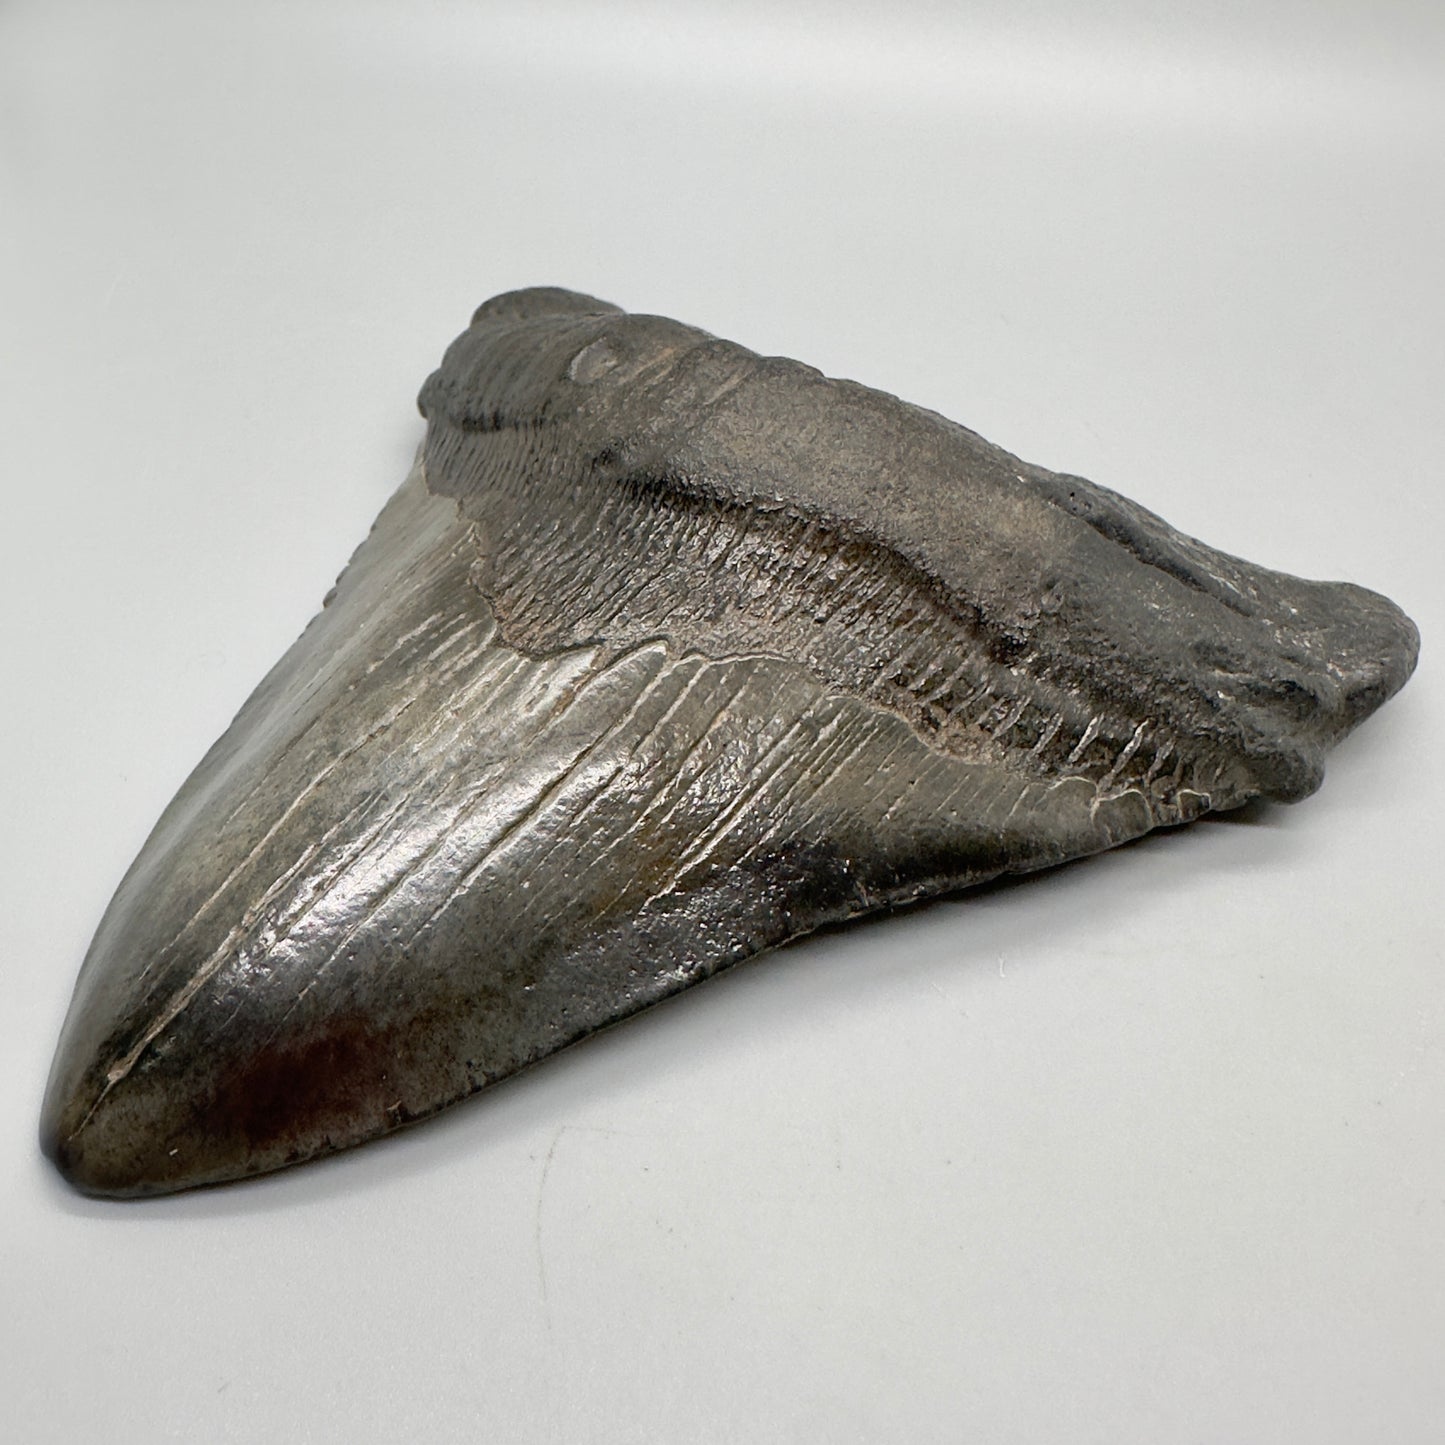 EXTRA LARGE 6.01" Fossil Megalodon Tooth: Scuba Diving, USA CM4698 - Front right